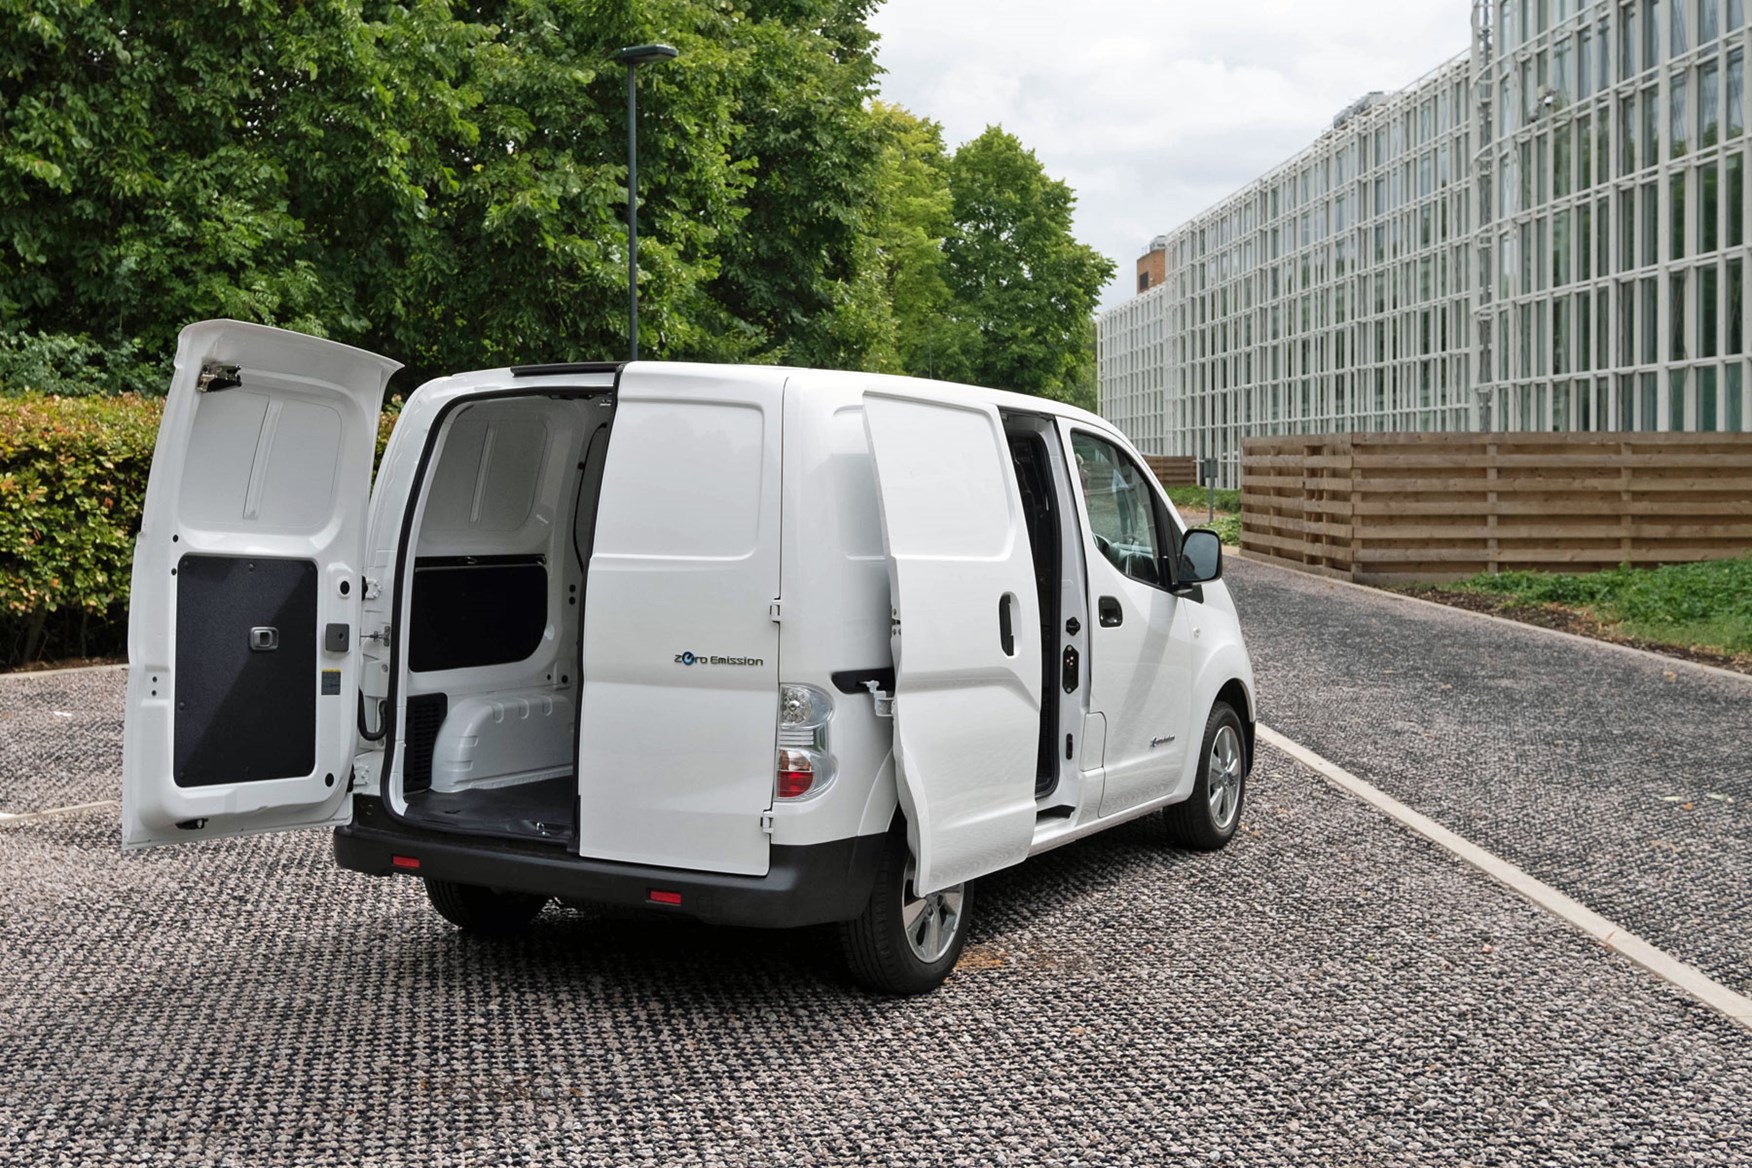 Nissan e-NV200 load area dimensions - rear view, doors open, 2020